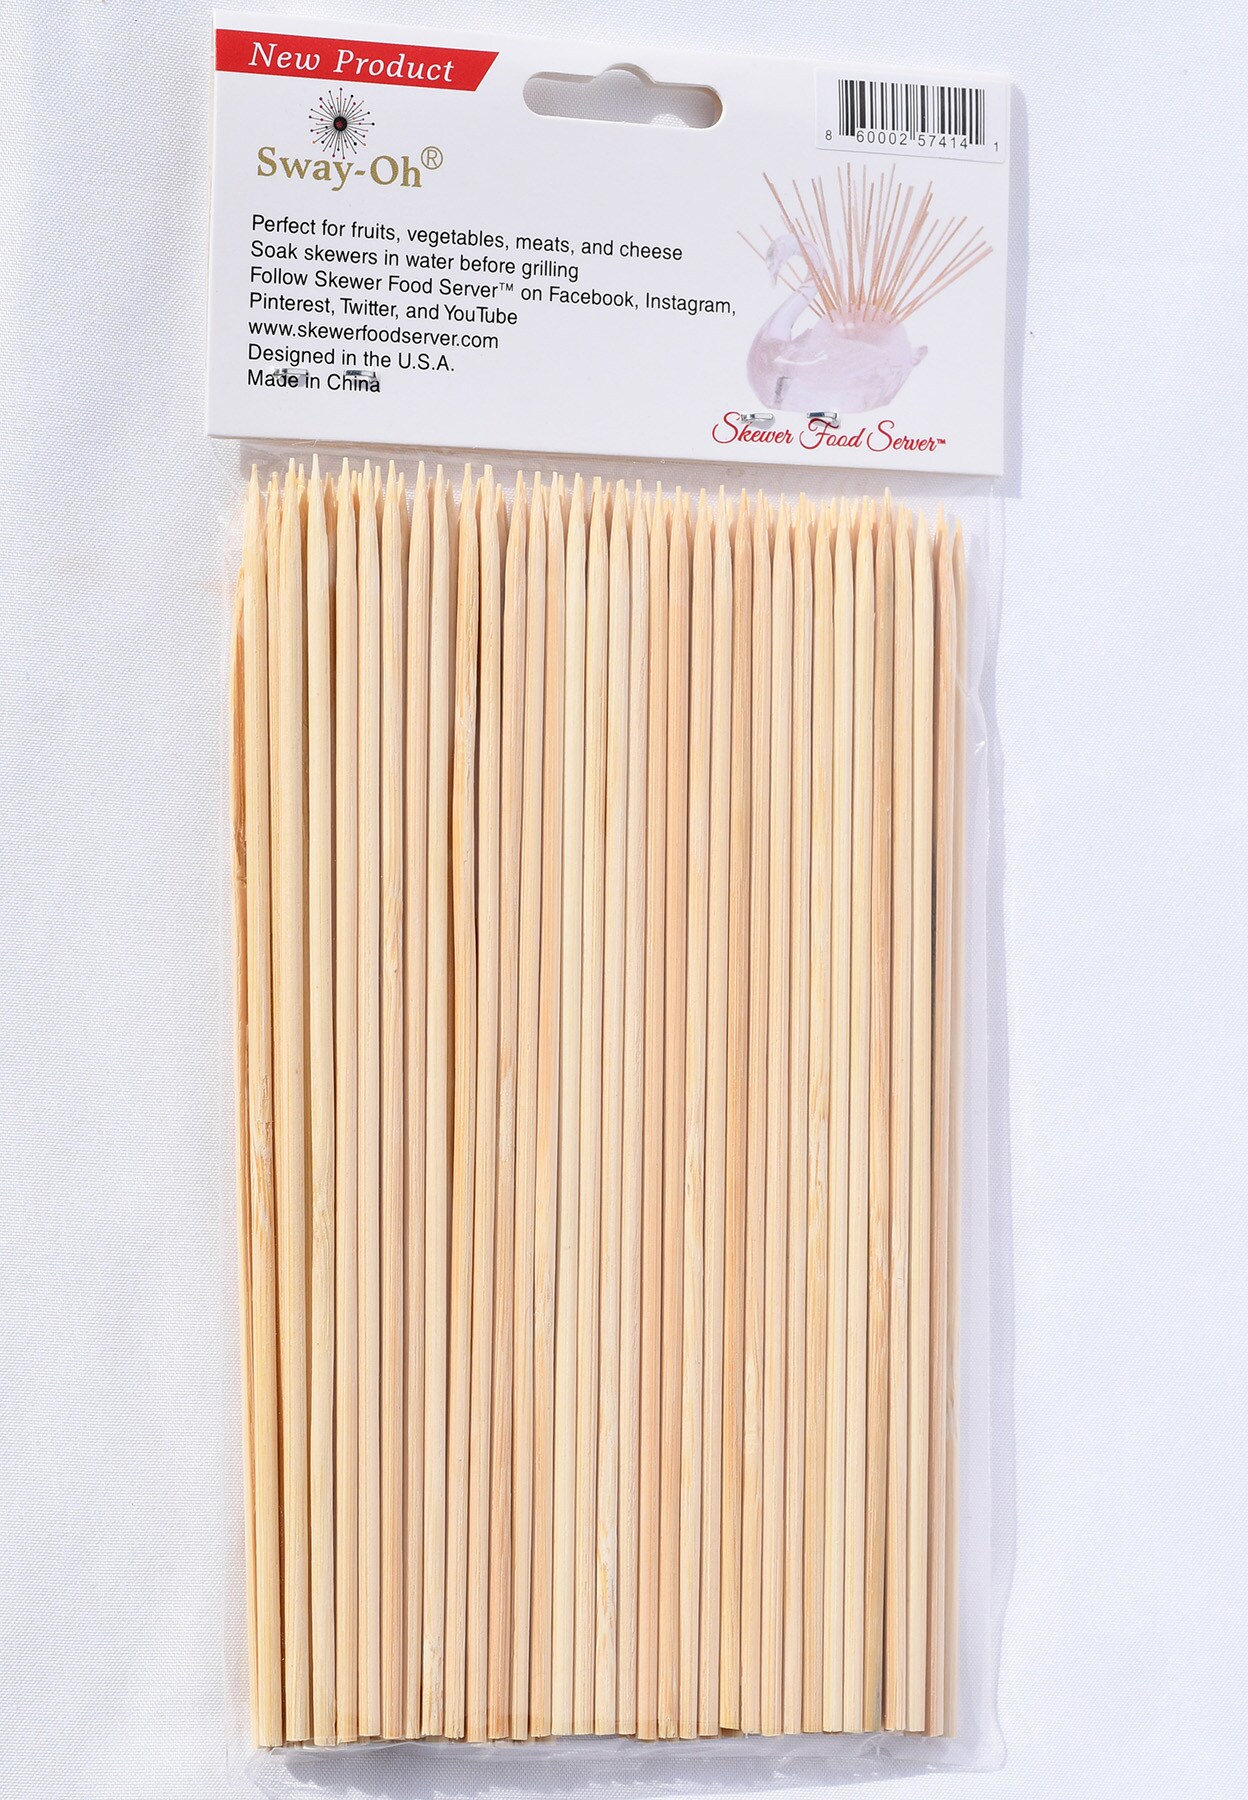 6&#x22; Natural Bamboo Skewers, 100 Count - &#xD8;=2mm. Natural Bamboo. Strong, durable, bamboo skewers to display bite-sized fruits, vegetables, meats, cheese, desserts, and other appetizers.